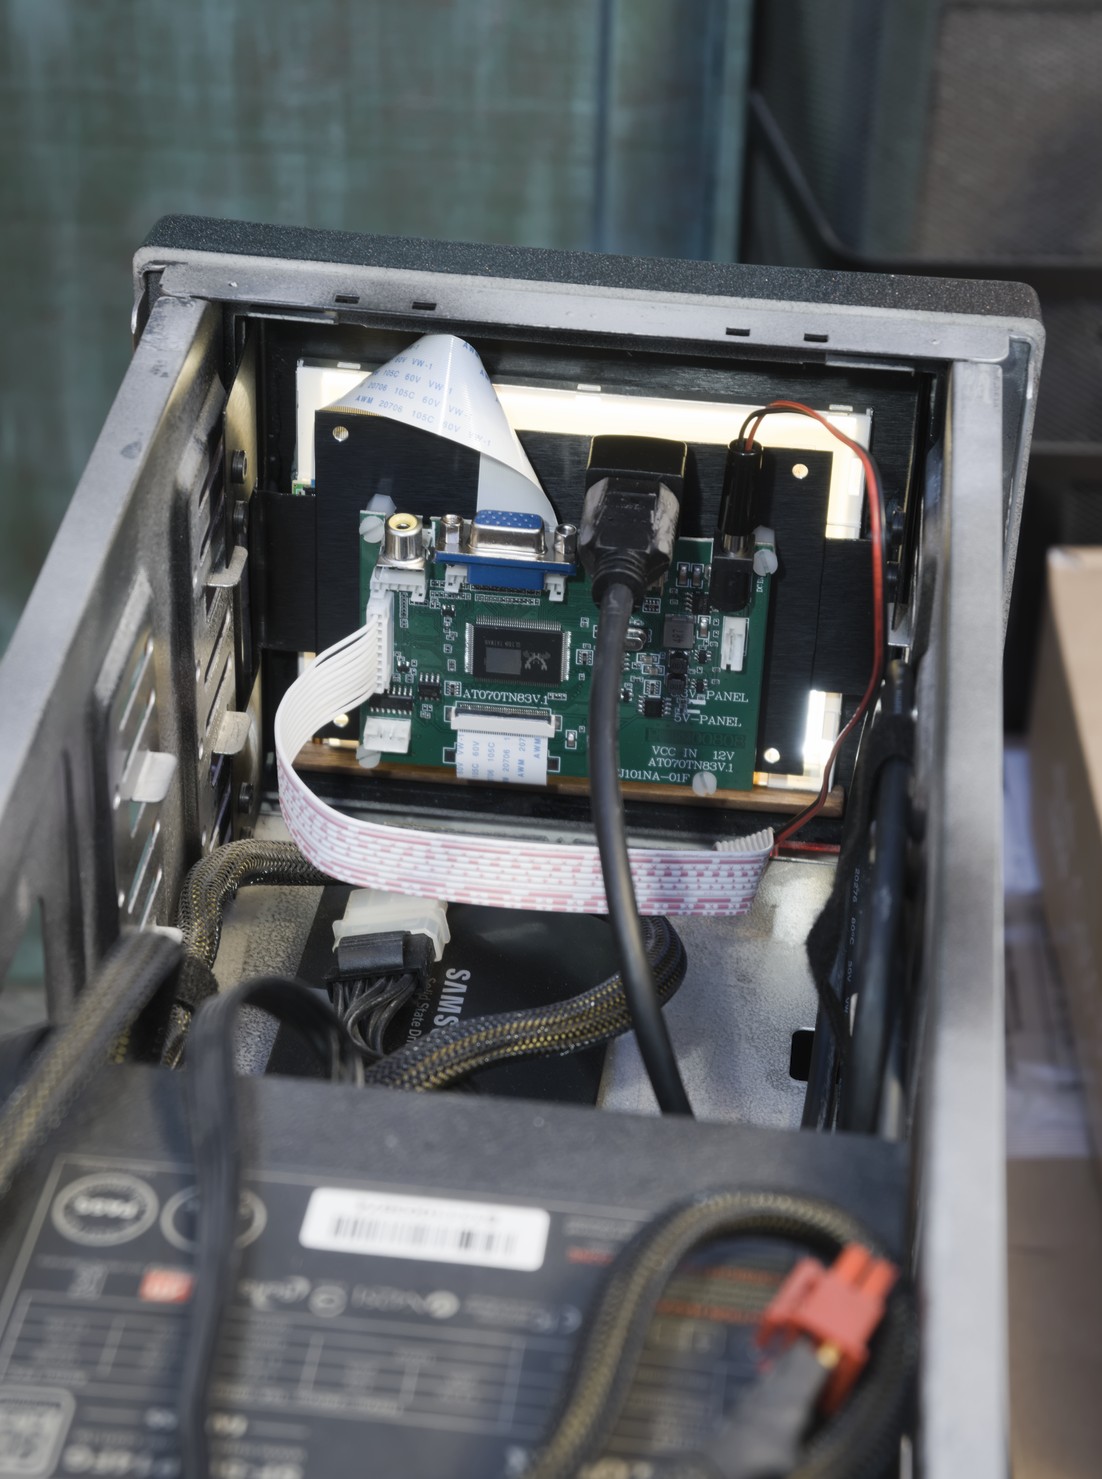 The complete assembly inside the server, viewed from behind.